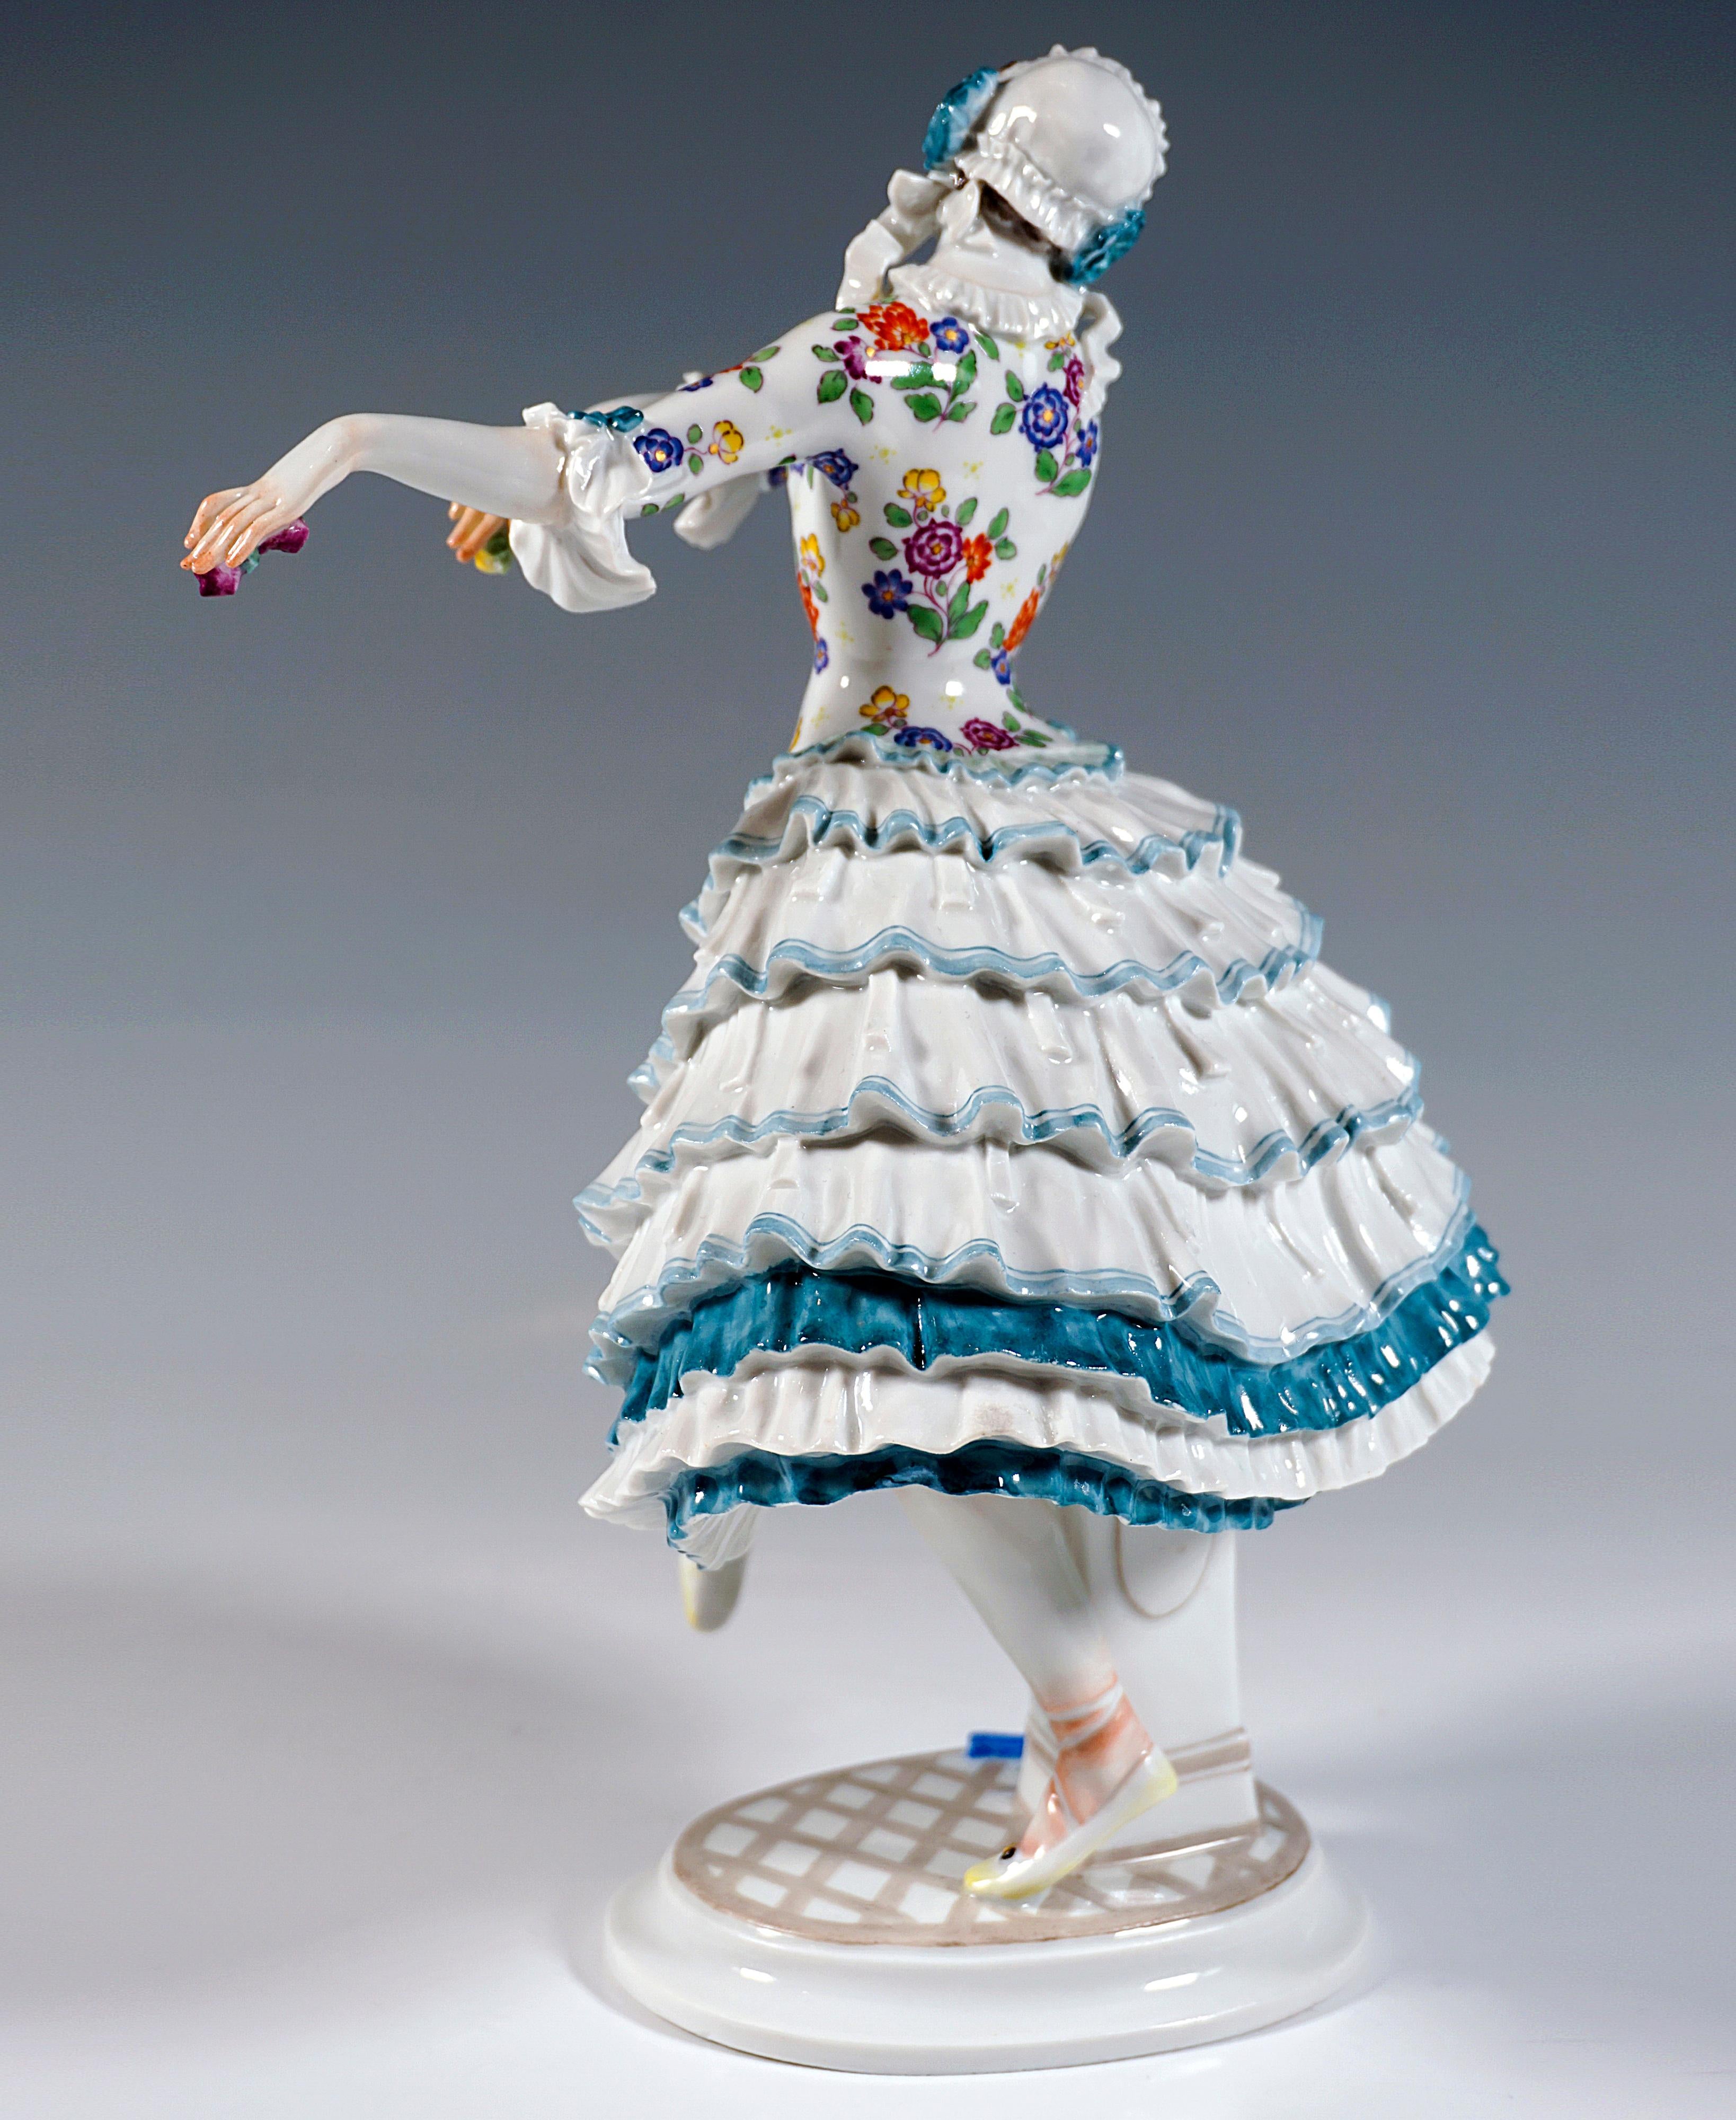 Hand-Crafted Meissen Figurine 'Chiarina', Russian Ballet 'Carnival', by Paul Scheurich, 20th For Sale